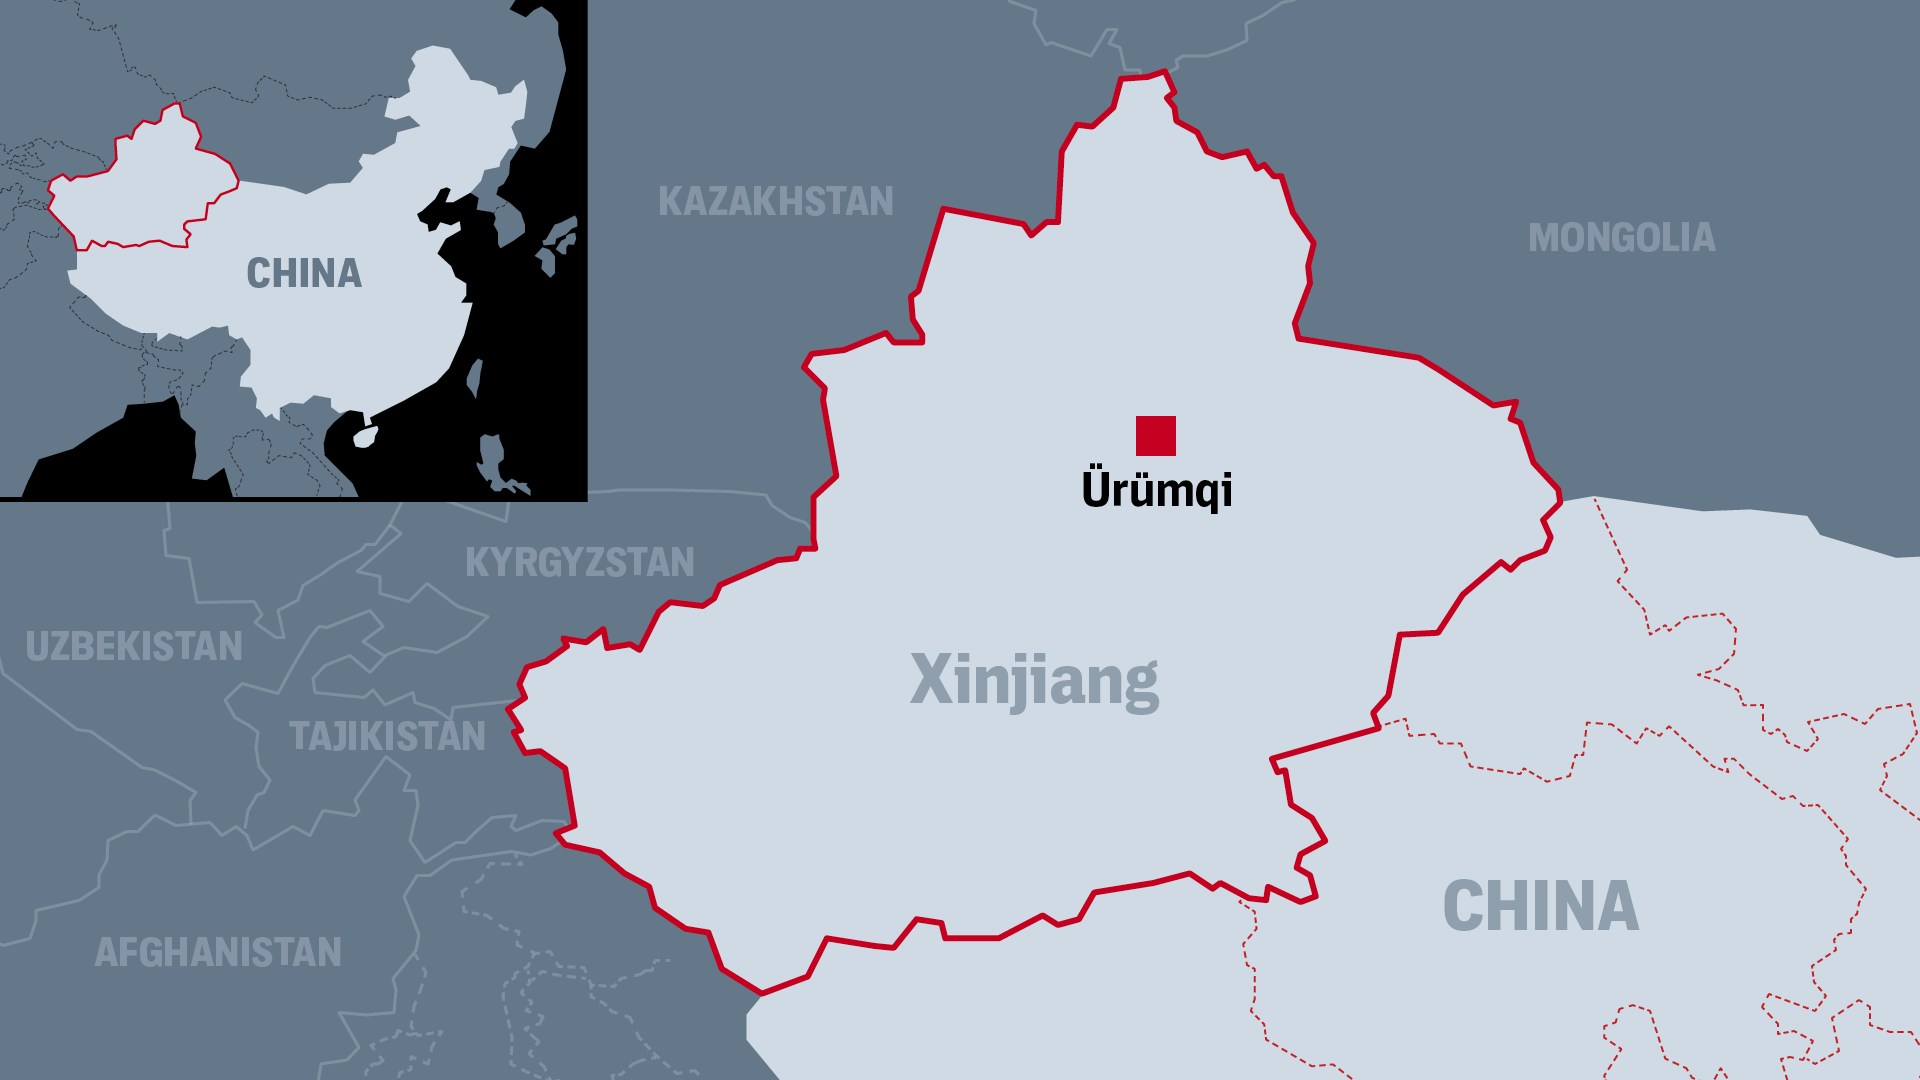 The database obtained by The Intercept contains police reports from Ürümqi, the capital and largest city in China's Xinjiang Uyghur Autonomous Region.